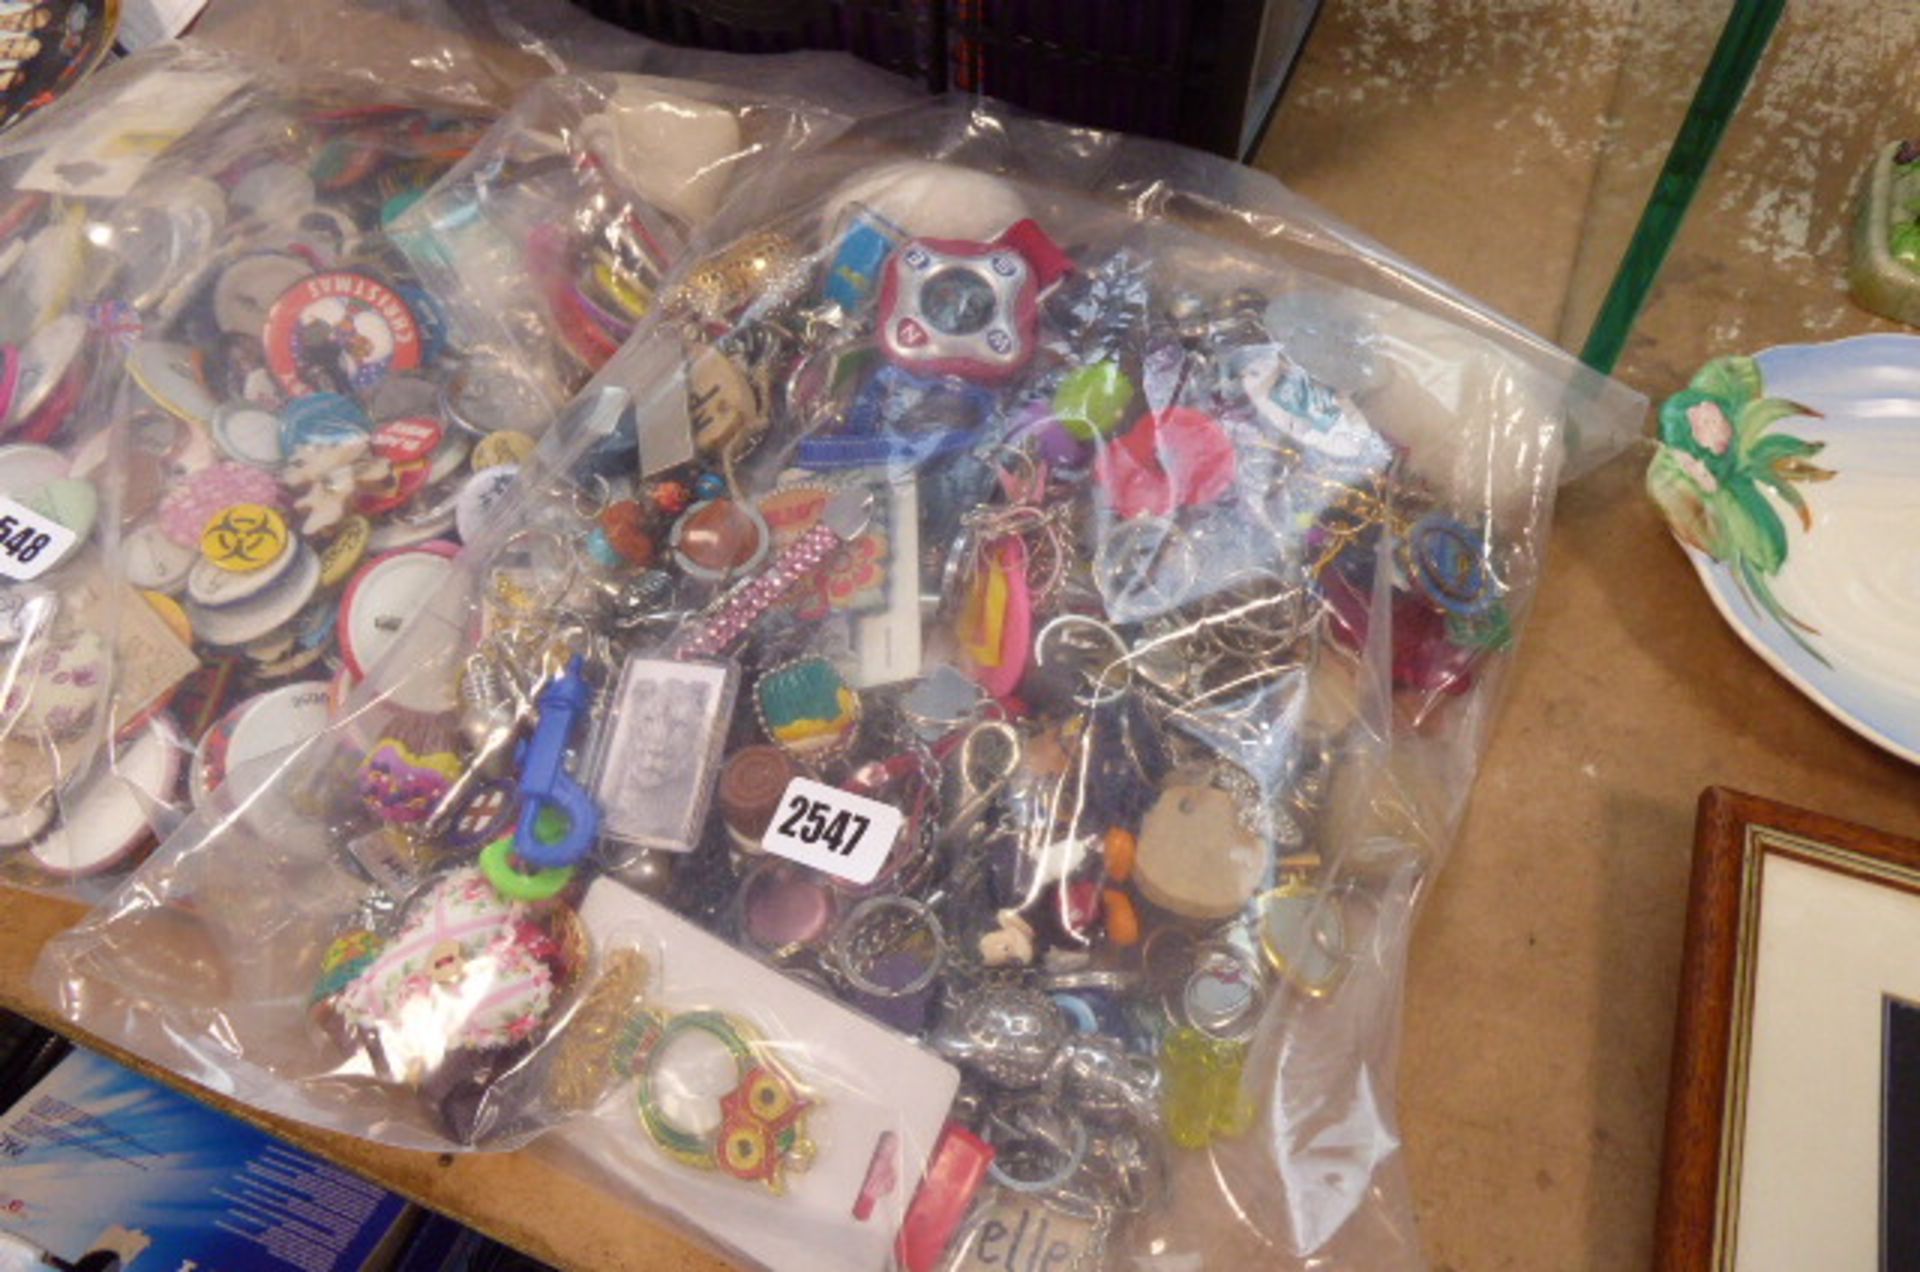 Collection of keyrings in clear bag